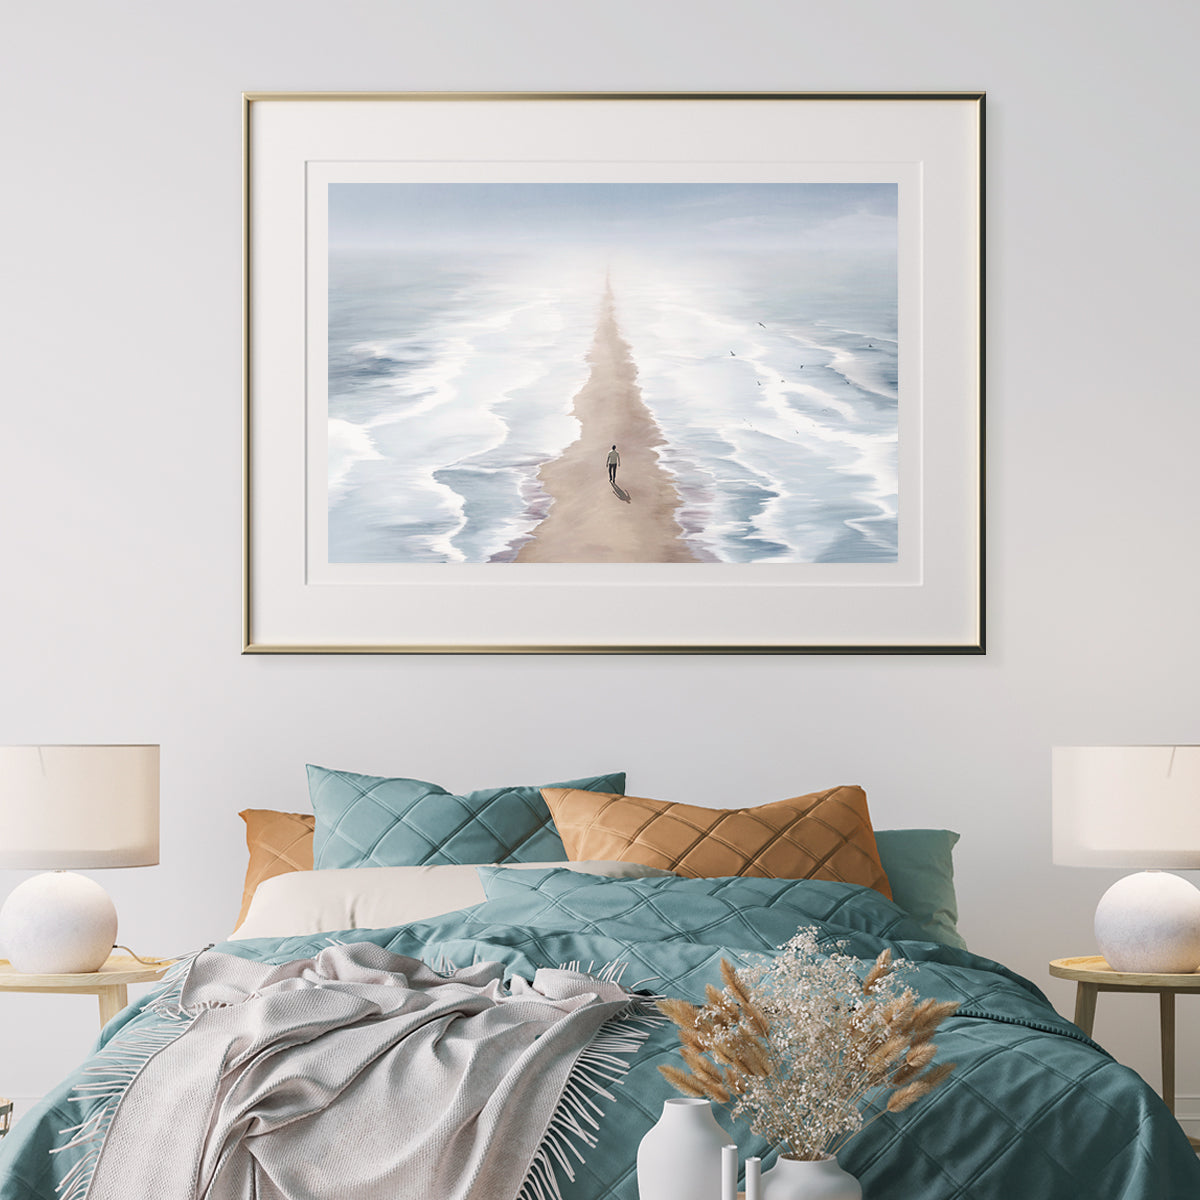 Man Walking in Beach Surreal Abstract Posters For Home Decor-Horizontal Posters NOT FRAMED-CetArt-10″x8″ inches-CetArt